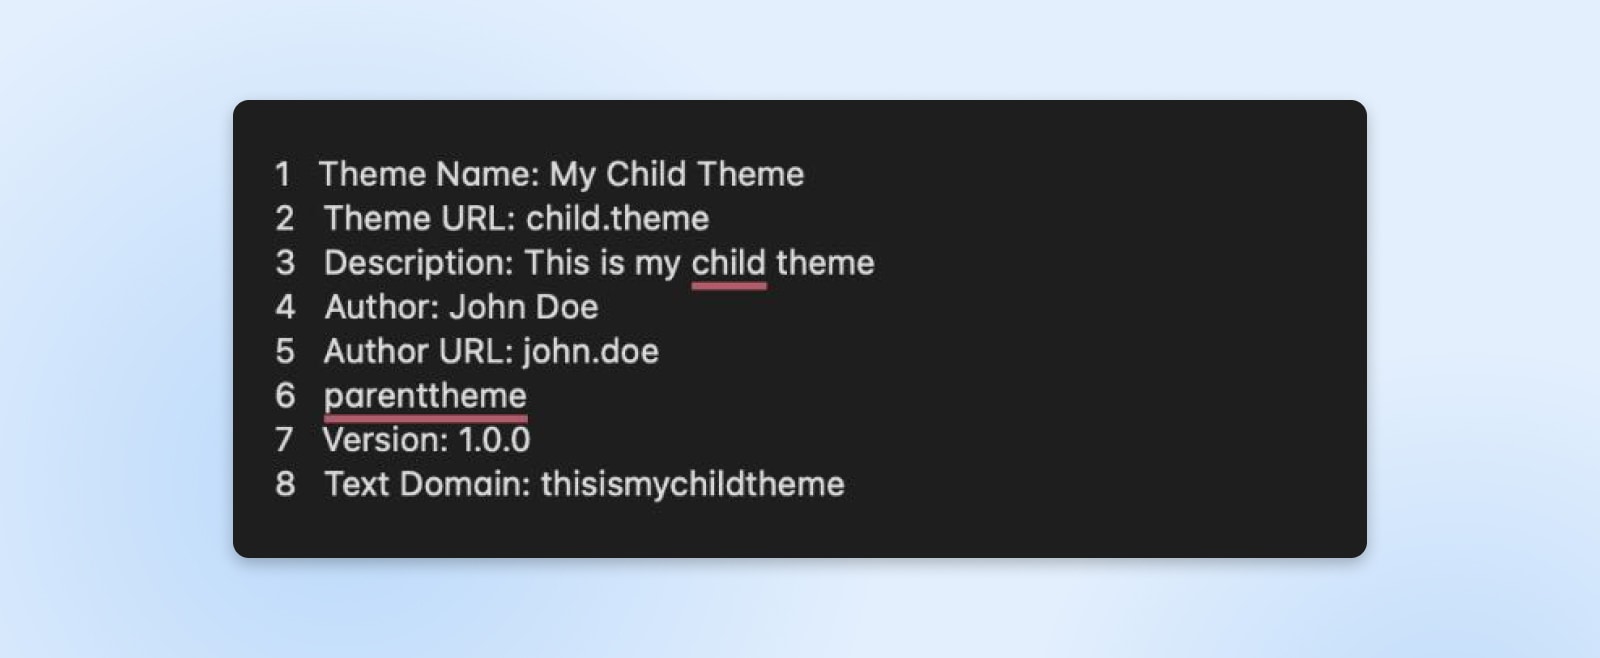 style sheet with 8 lines showing each written out line of the theme name, URL, description, author, author URL, parent theme, version, and text domain